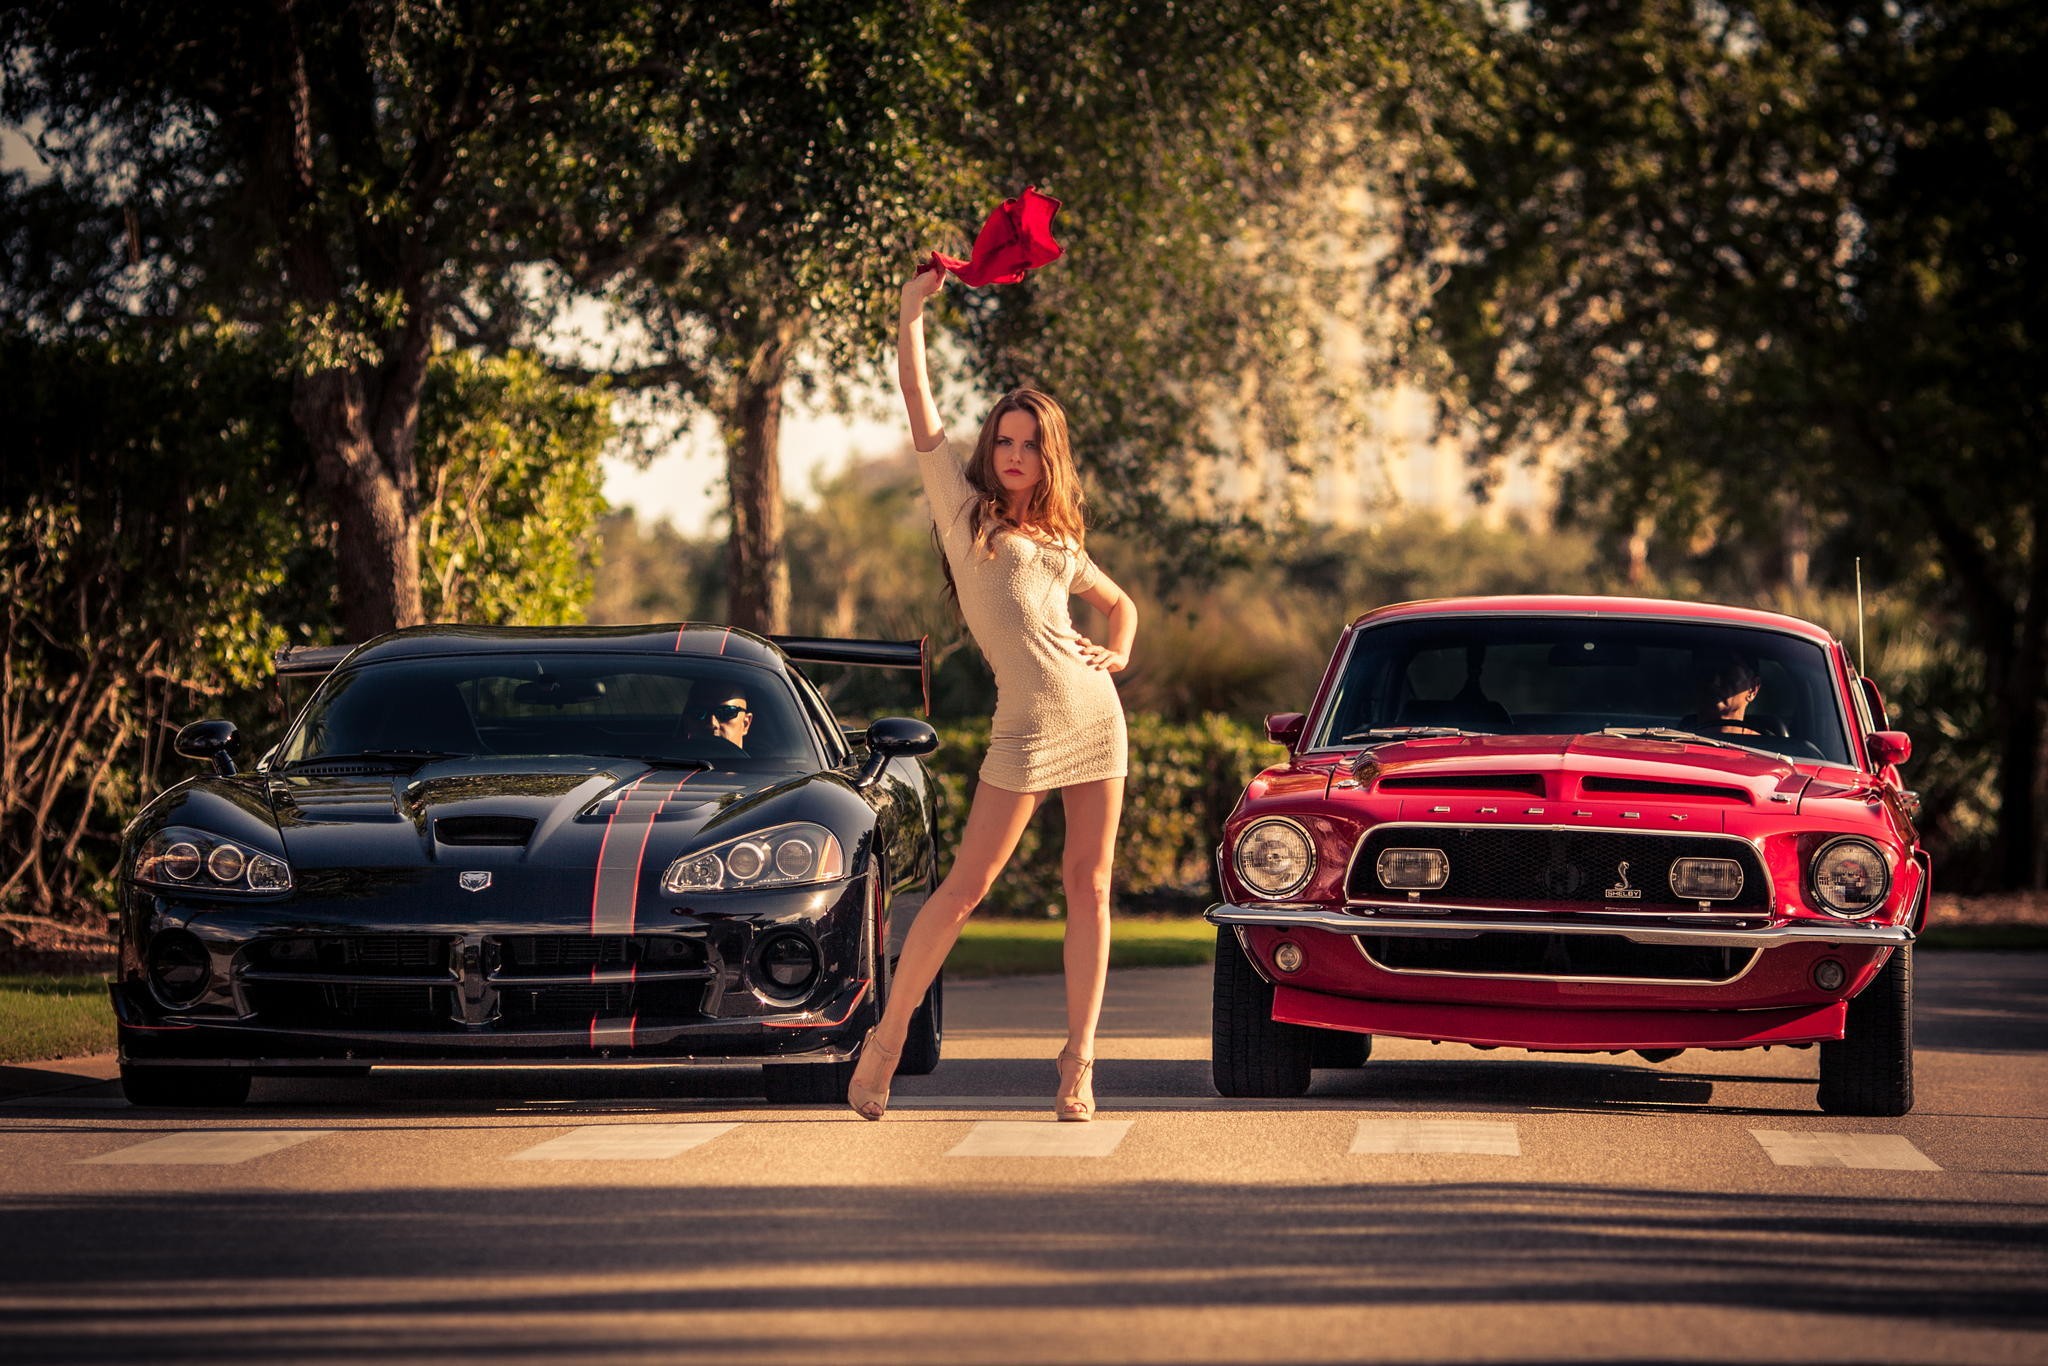 General 2048x1366 car minidress road trees women American cars women with cars Kristina Yakimova Dodge Viper muscle cars high heels racing stripes vehicle women outdoors standing legs arms up red cars black cars Ford Ford Mustang